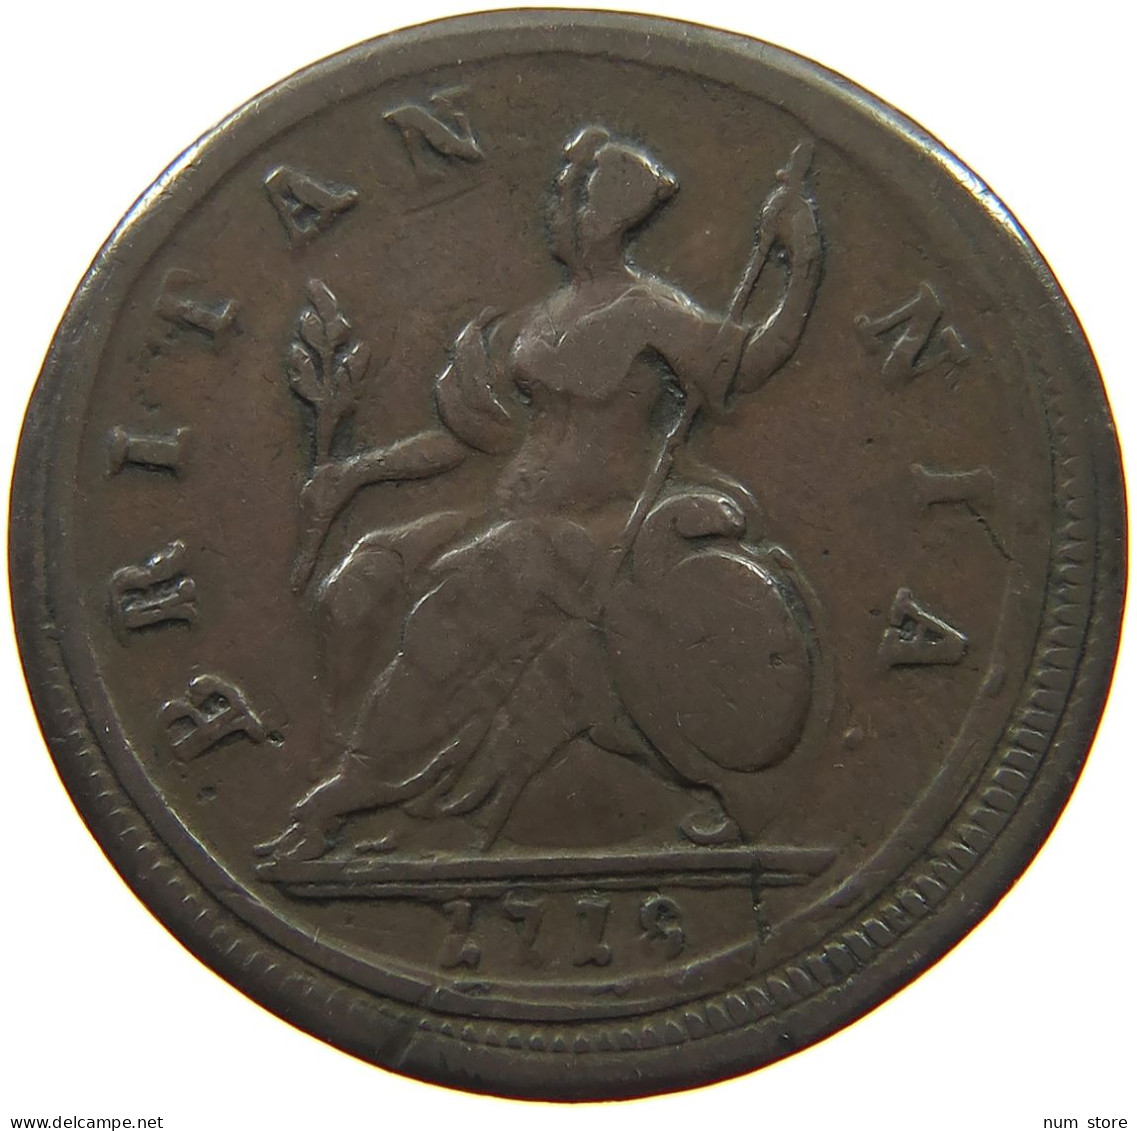 GREAT BRITAIN HALFPENNY 1718 George I. (1714-1727) #t149 0163 - B. 1/2 Penny